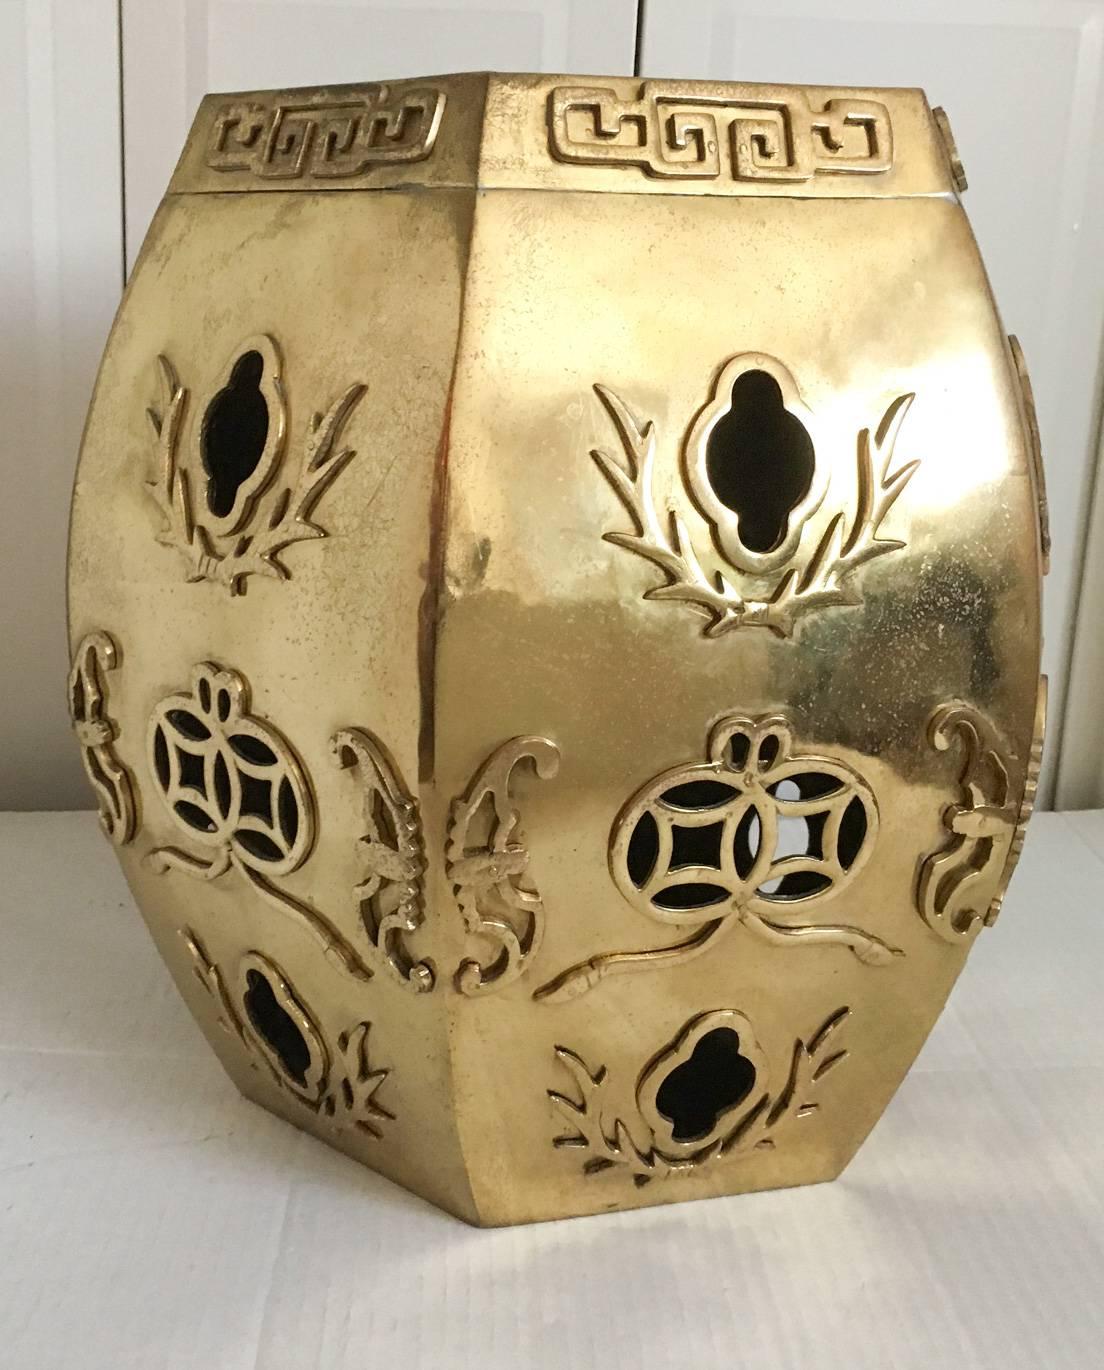 Exquisite and heavy 15-pound solid brass Chinese garden stool with a gorgeous pierced top and side panels. Piece has some all-over natural brass age patina and tiny age spots as shown. Unmarked.